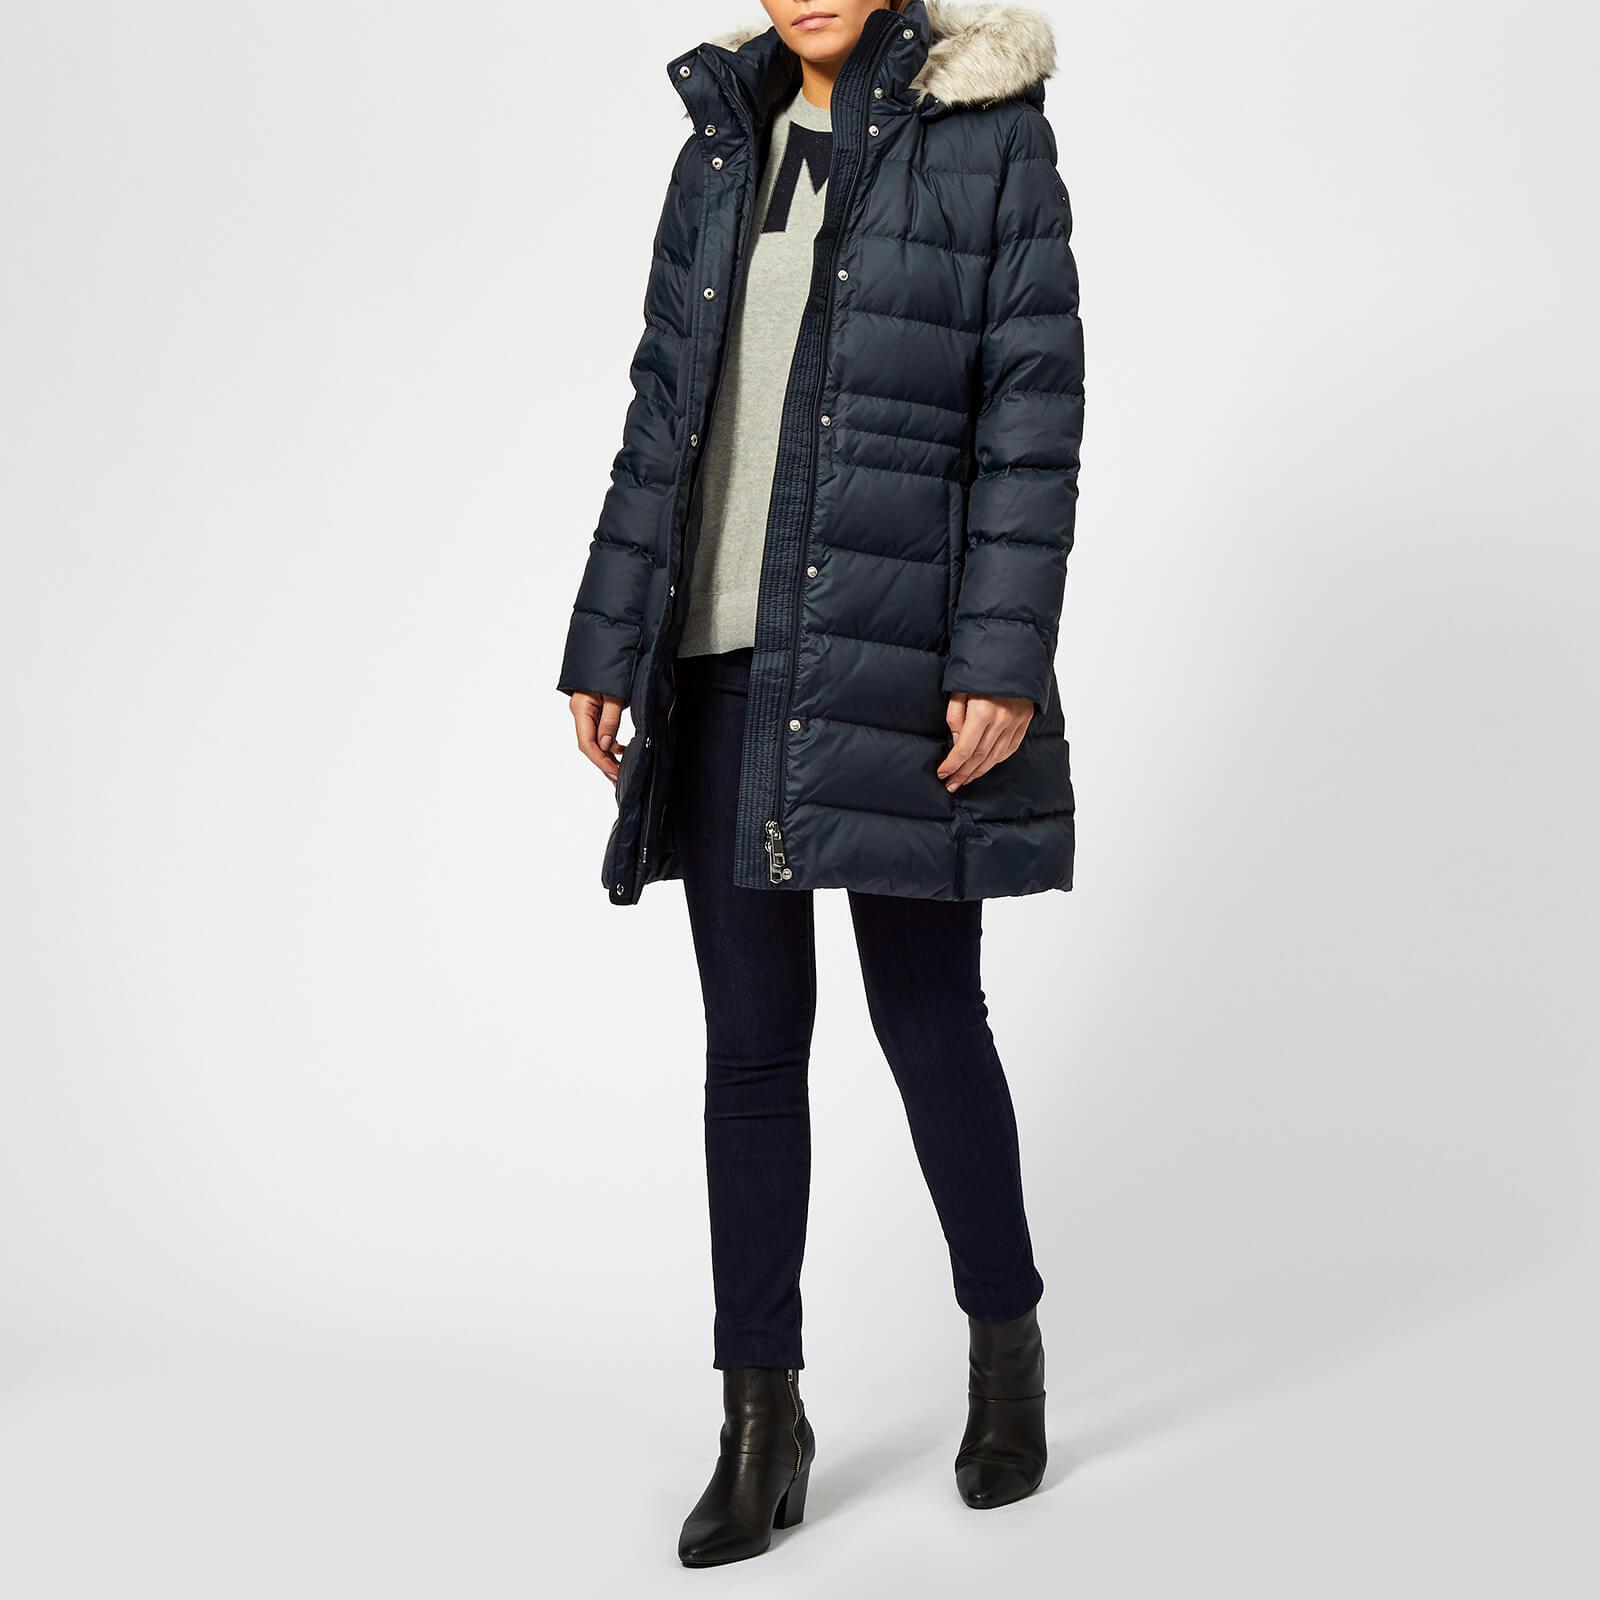 Tommy Hilfiger Tyra Coat Shop, SAVE 47% - aveclumiere.com